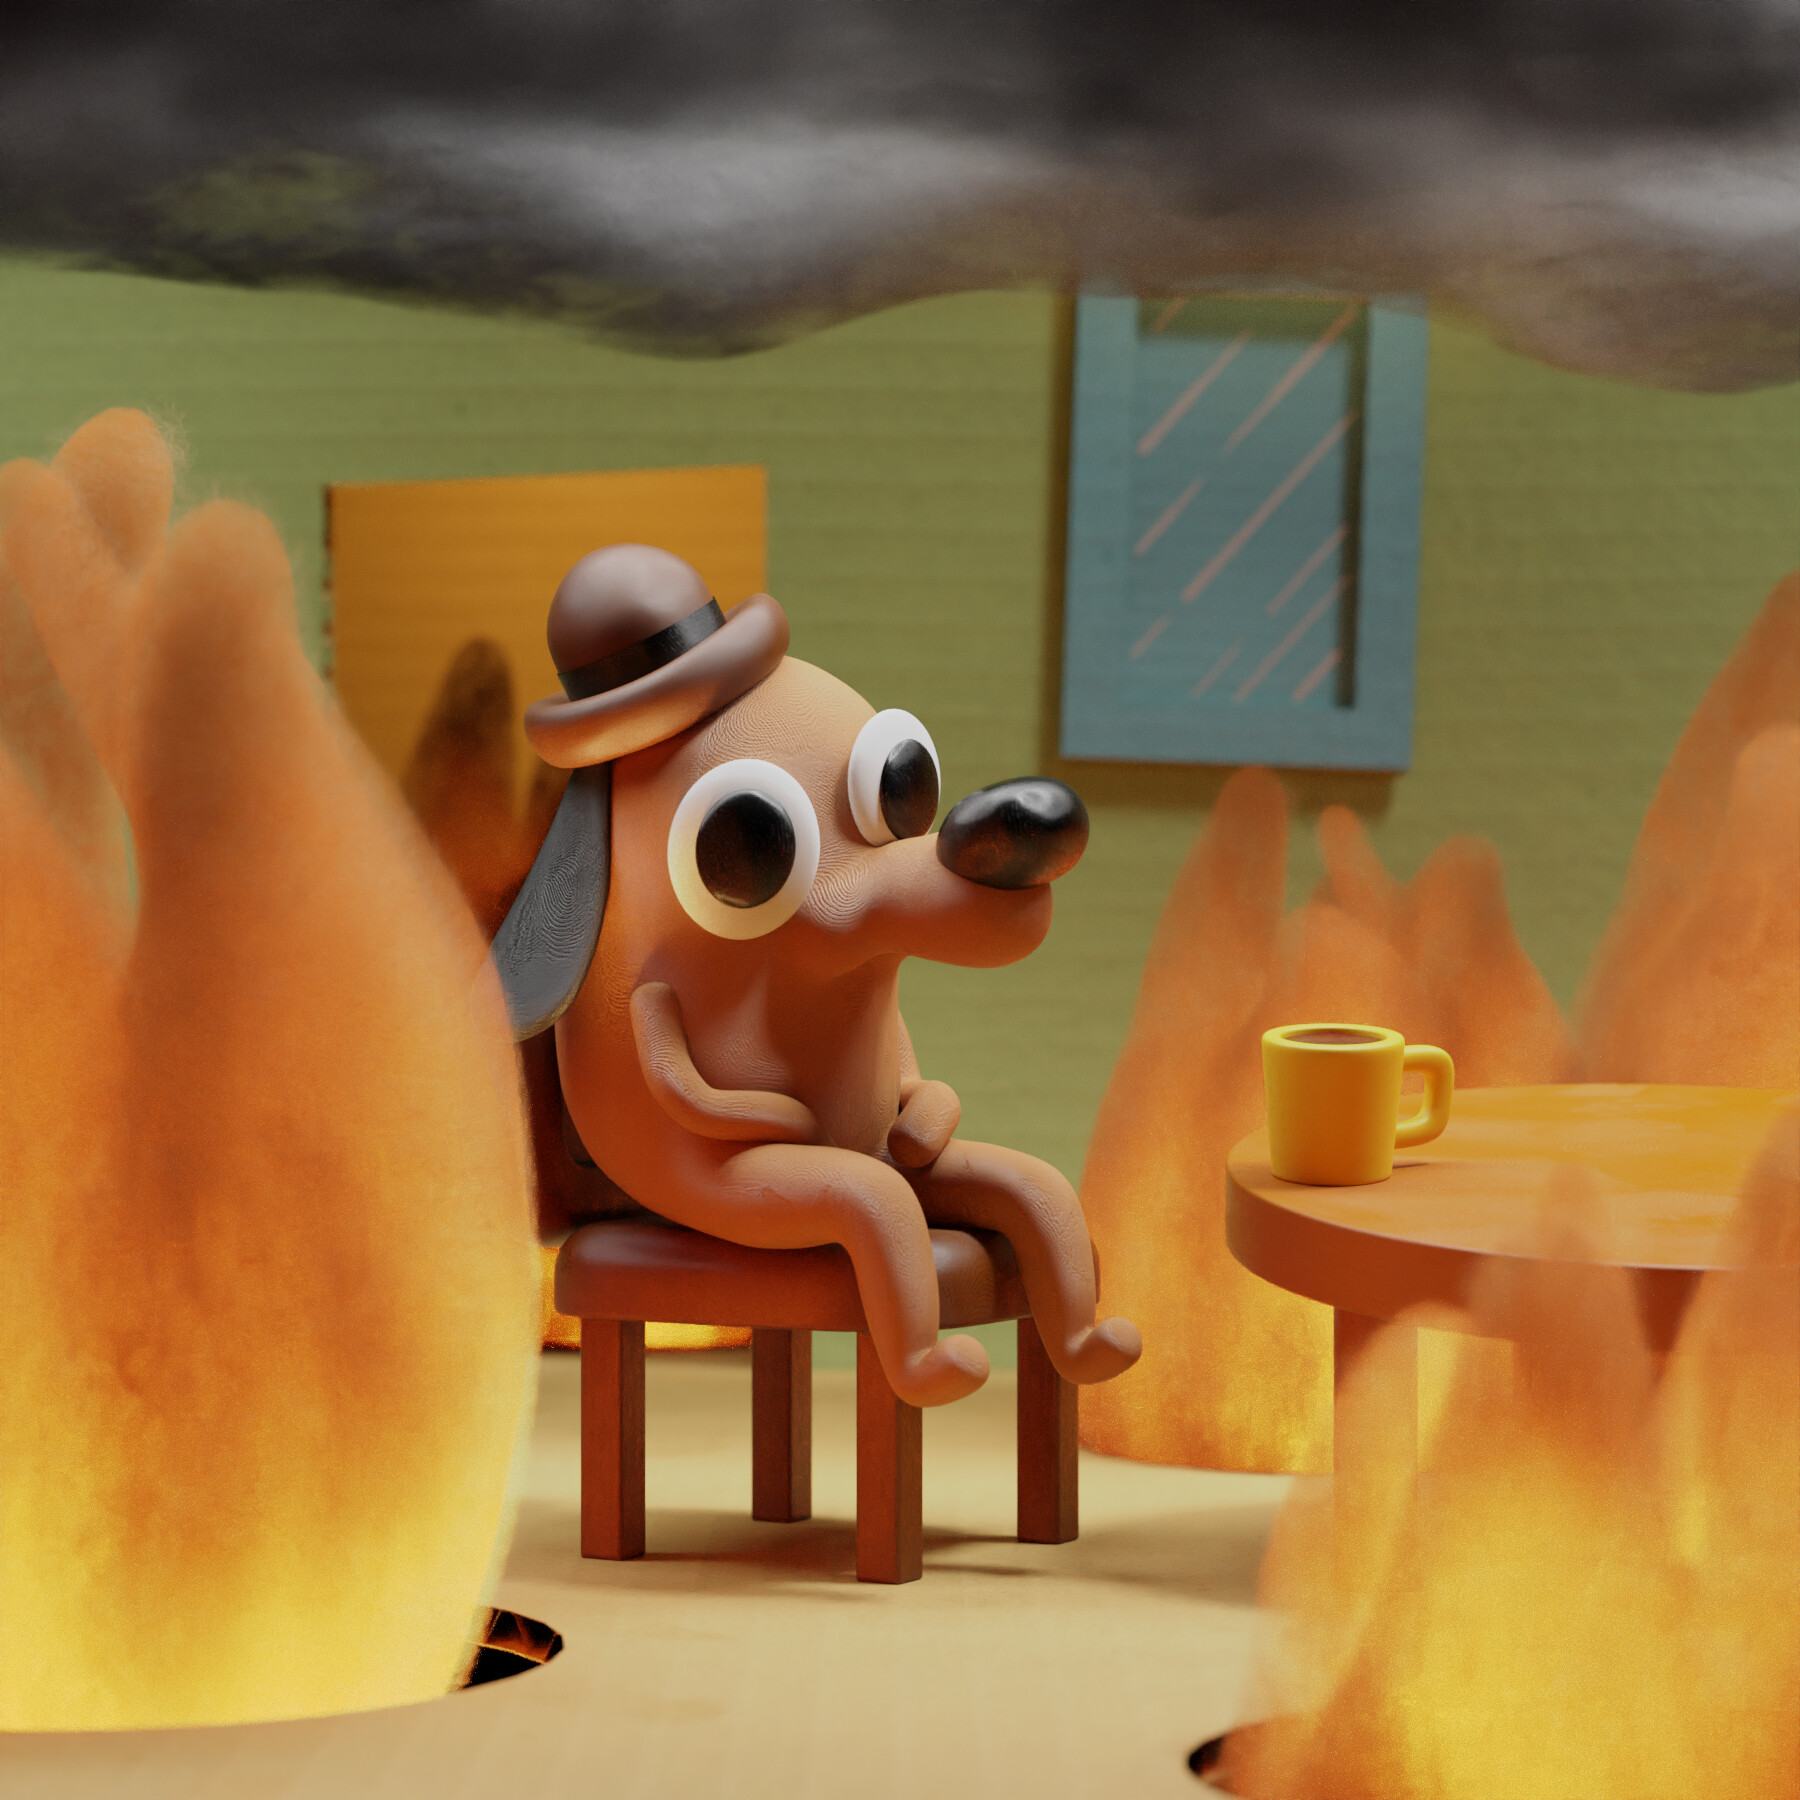 This Is Fine - Animations - Blender Artists Community